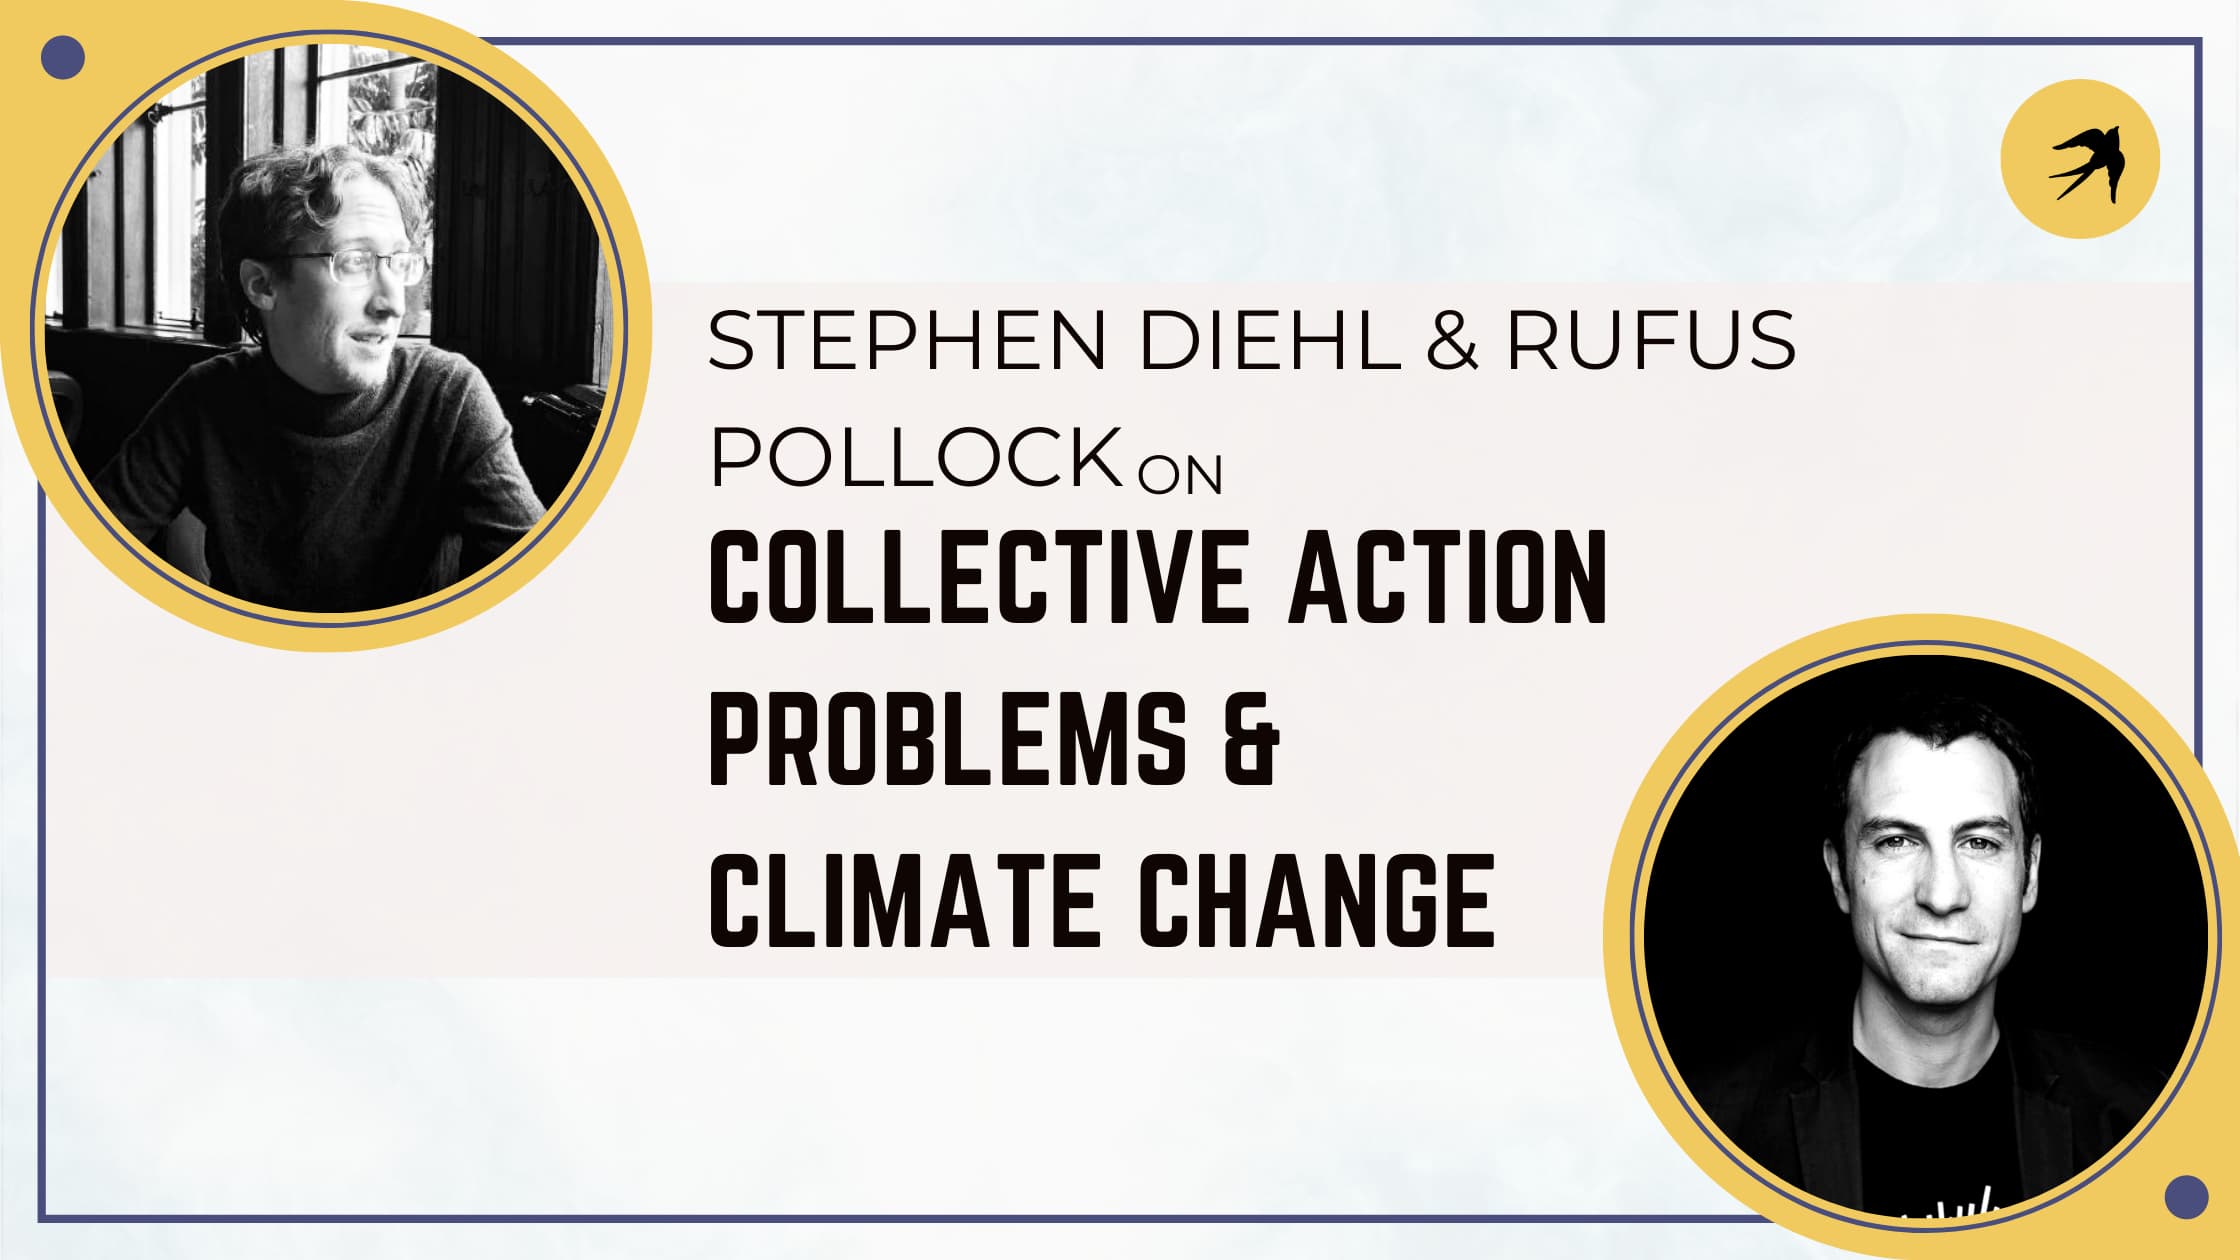 Collective Action Problems & Climate Change